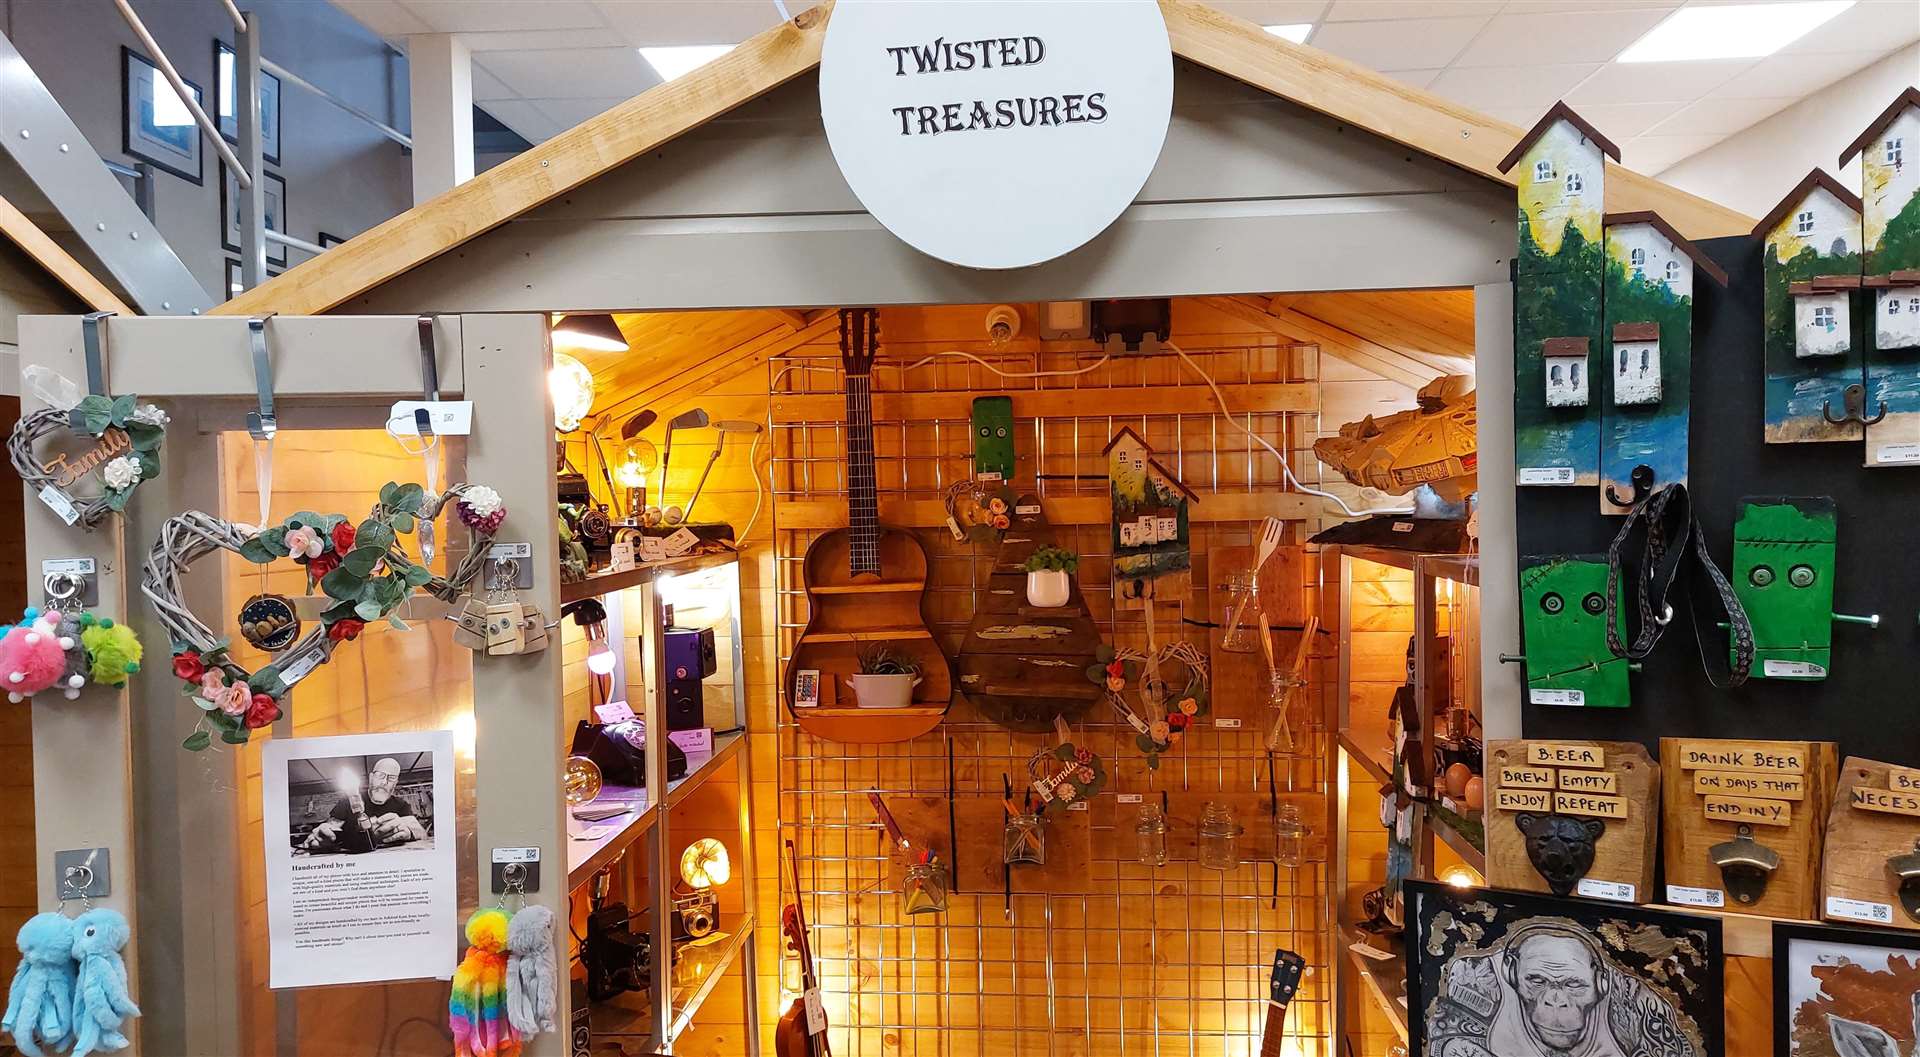 Twisted Treasures sells items created by a local artist